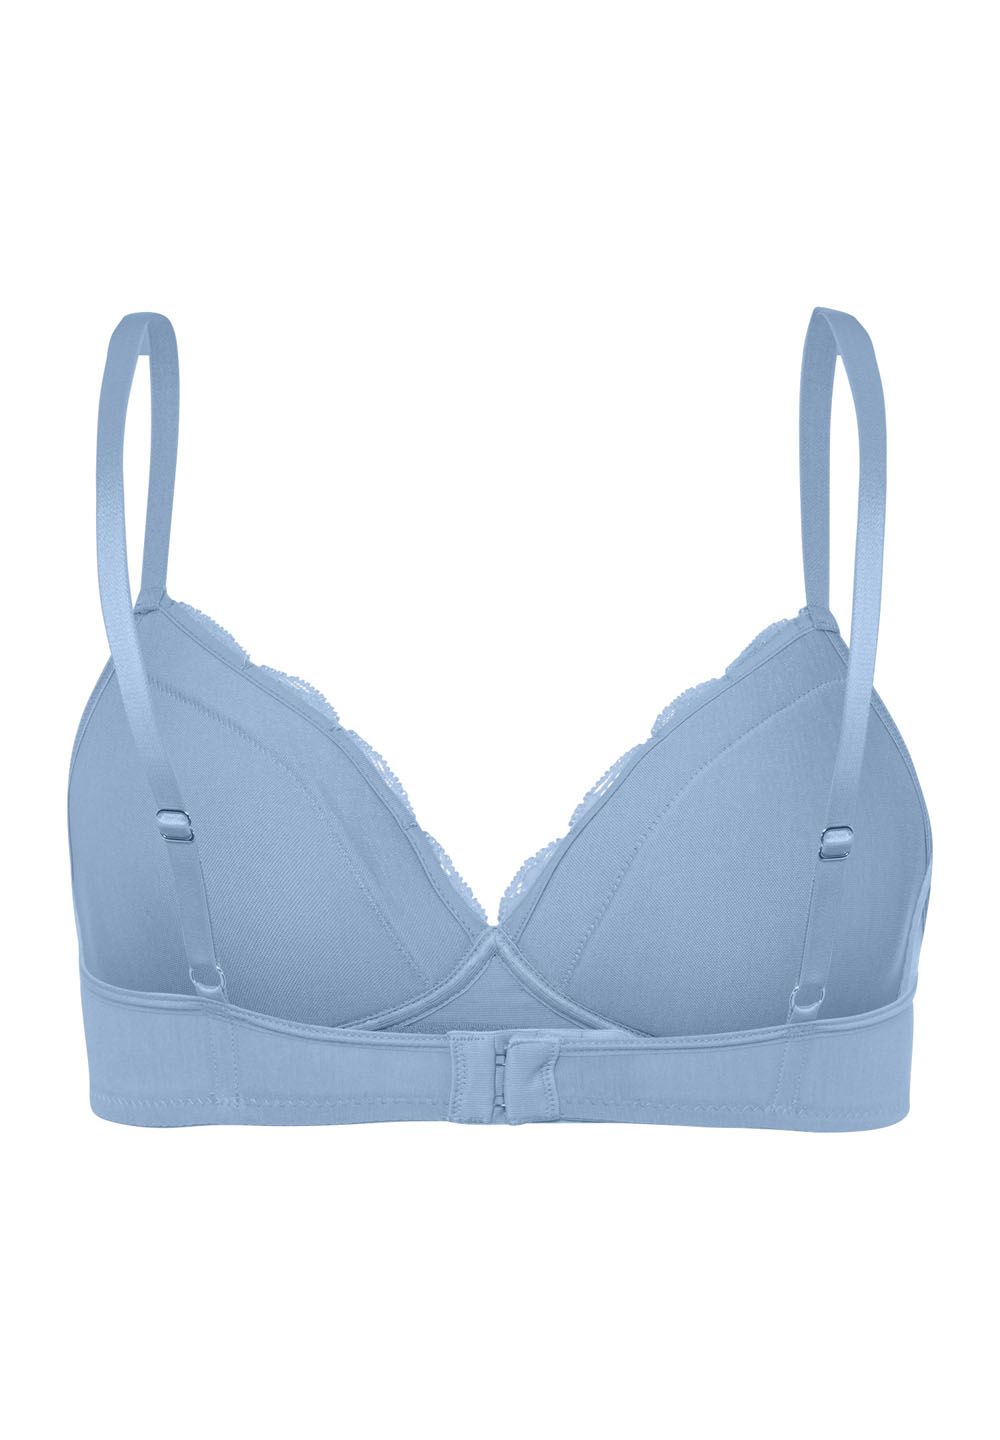 Midi Brief in colour blue moon from the Cotton Lace collection from HANRO